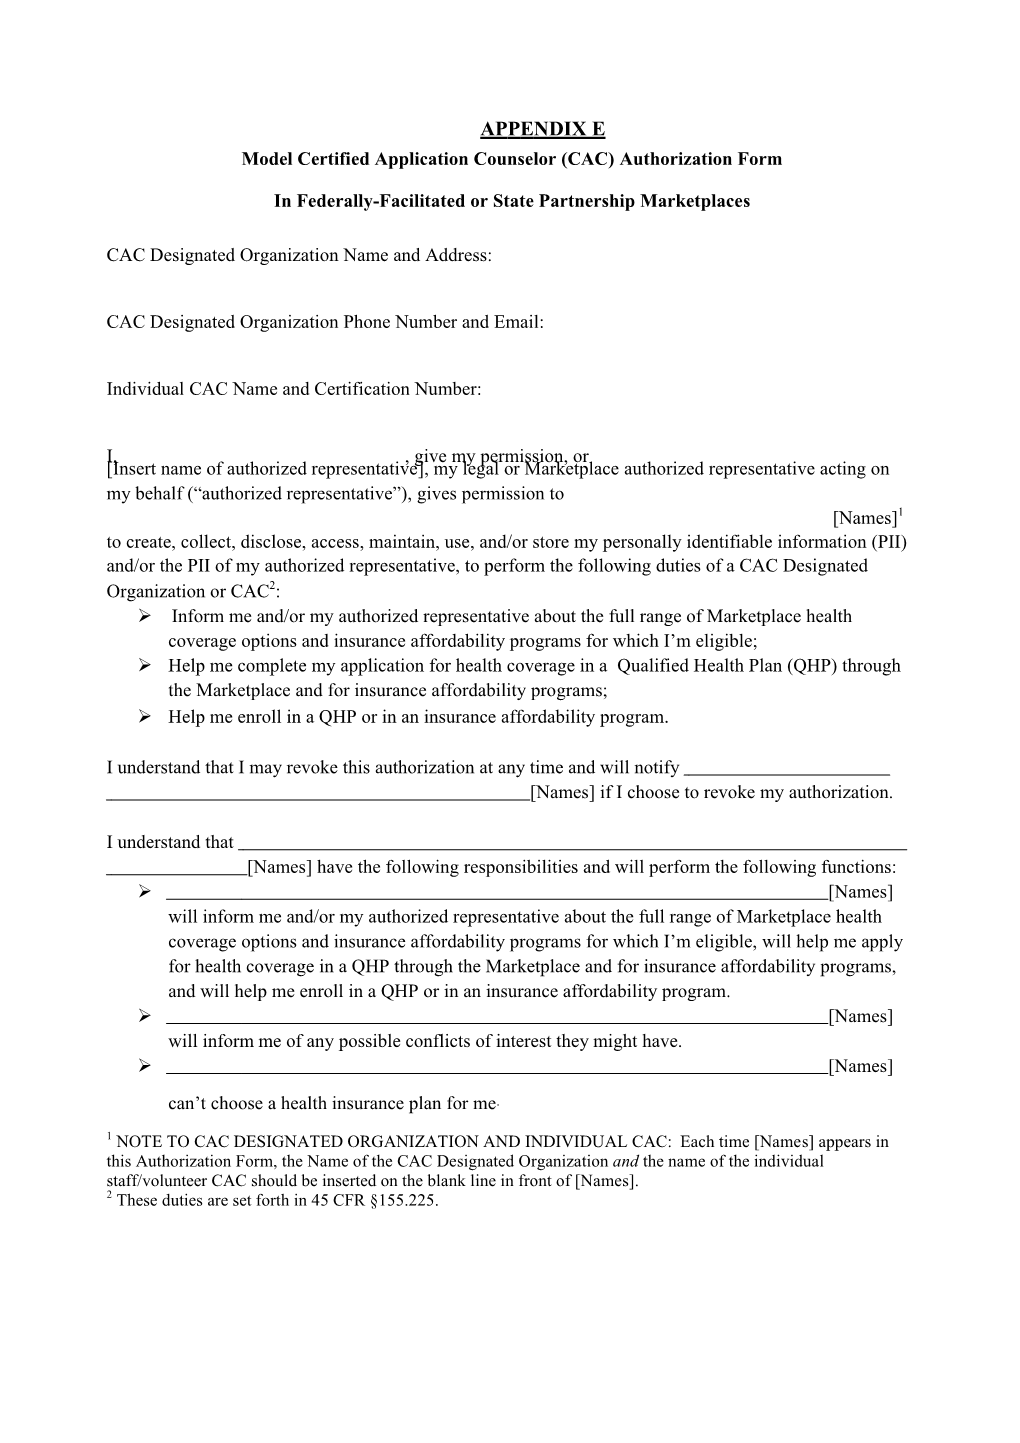 CAC-Designated Assistance Consent Form Template